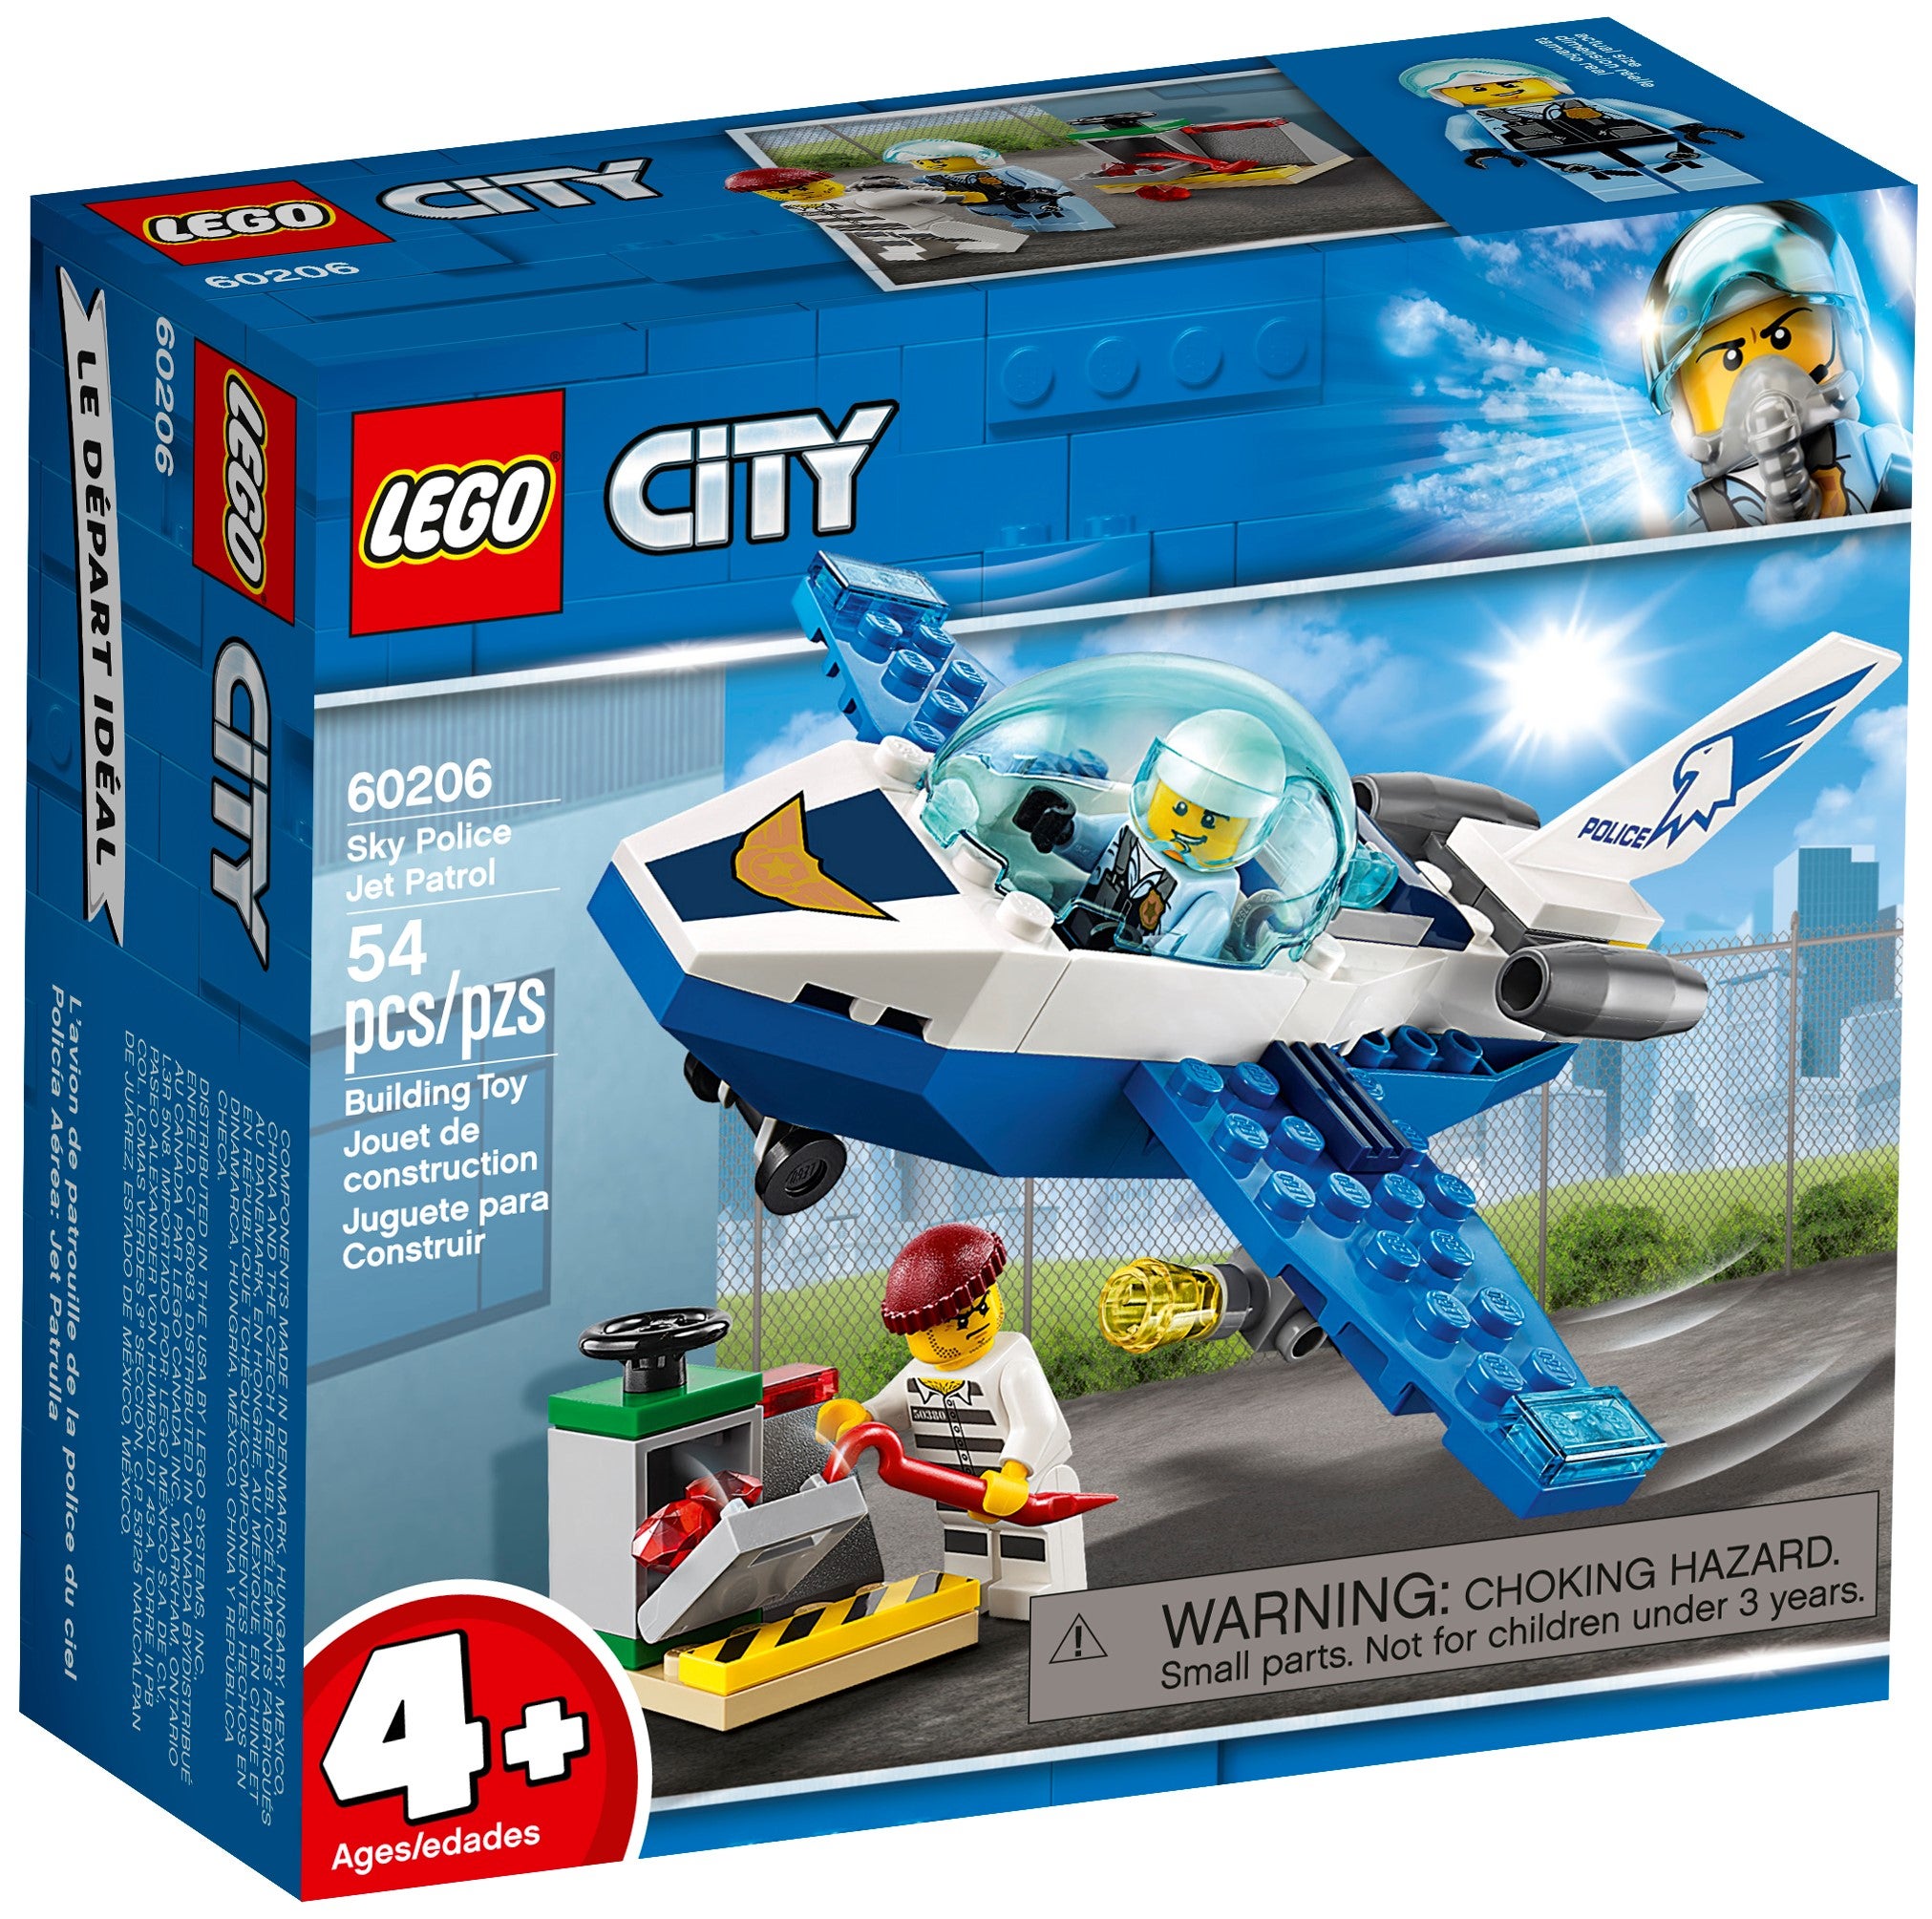 BRAND NEW In Factory Packaging LEGO 60206 City Sky Police Jet Patrol 54pcs 4